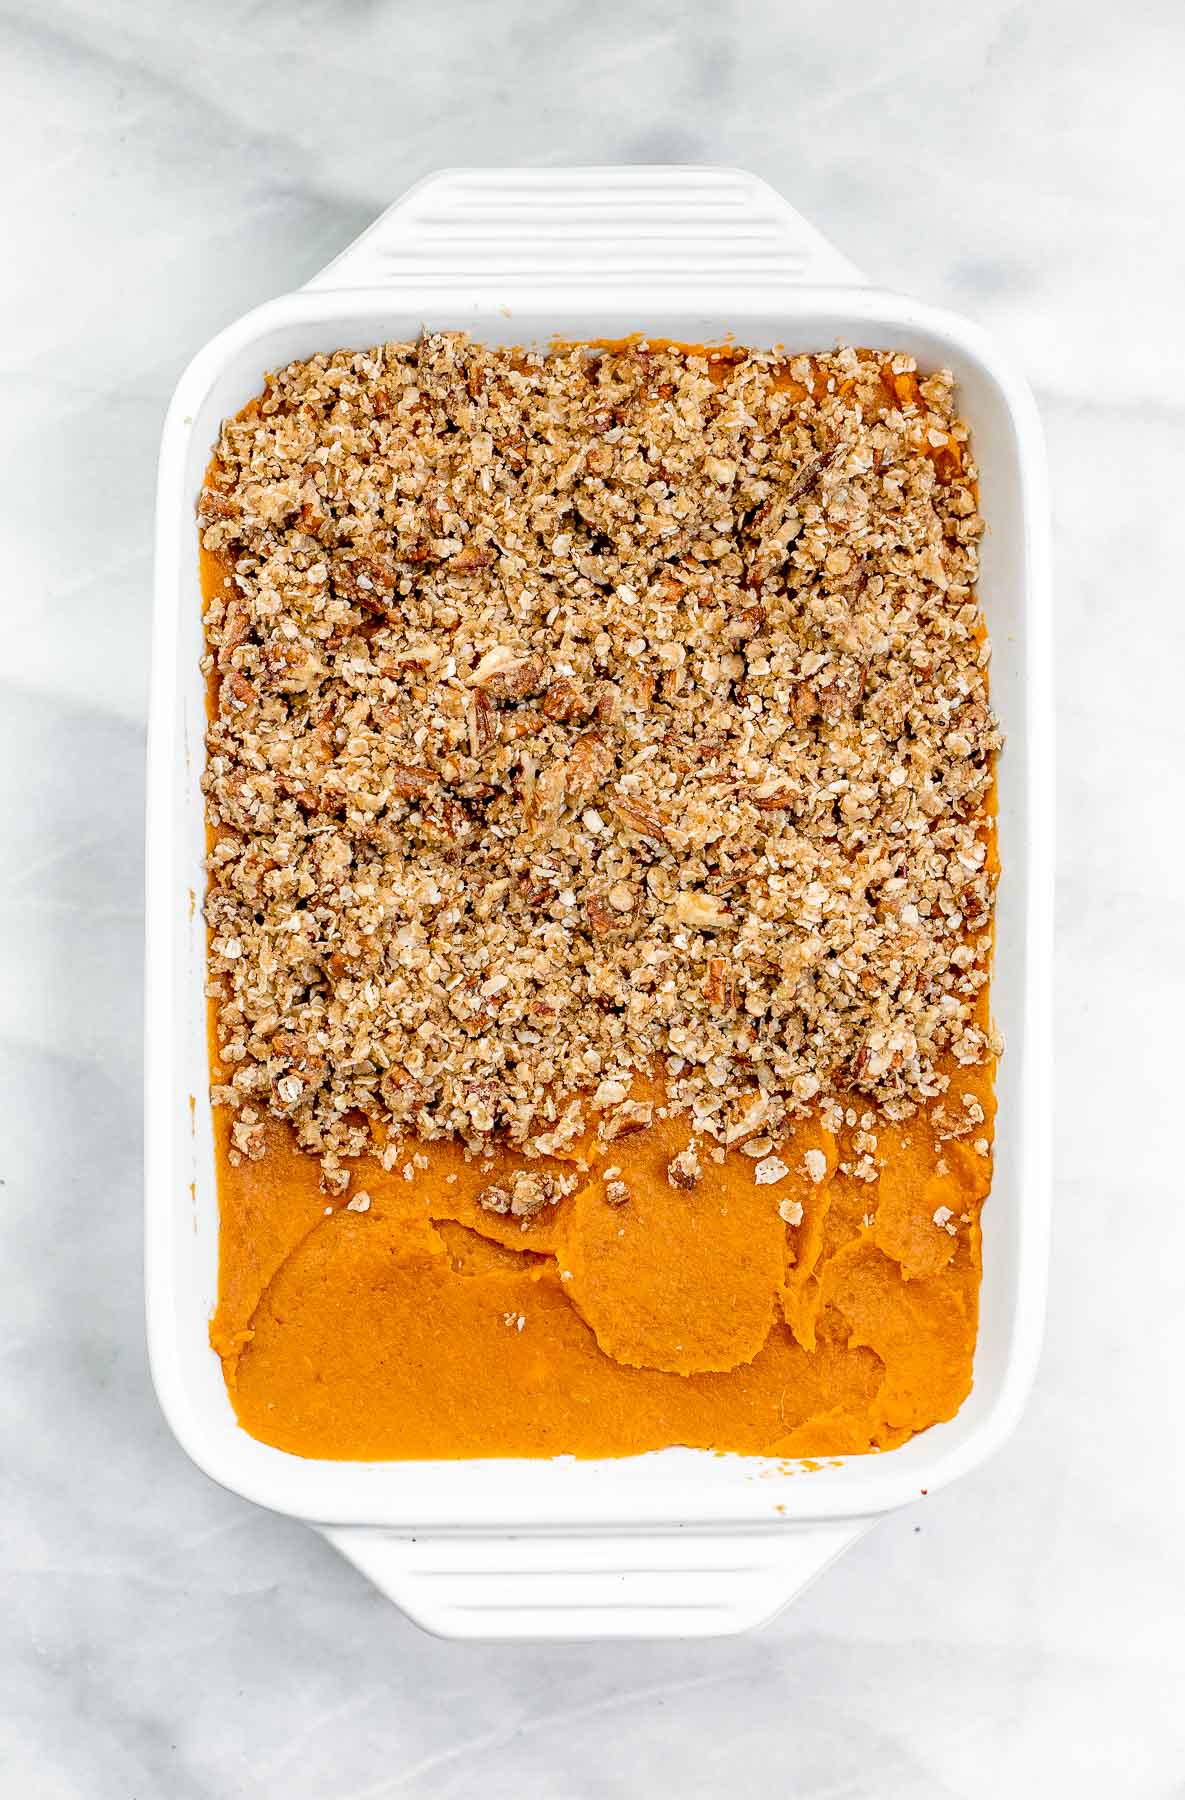 Sweet potato casserole with oat crumble on top.